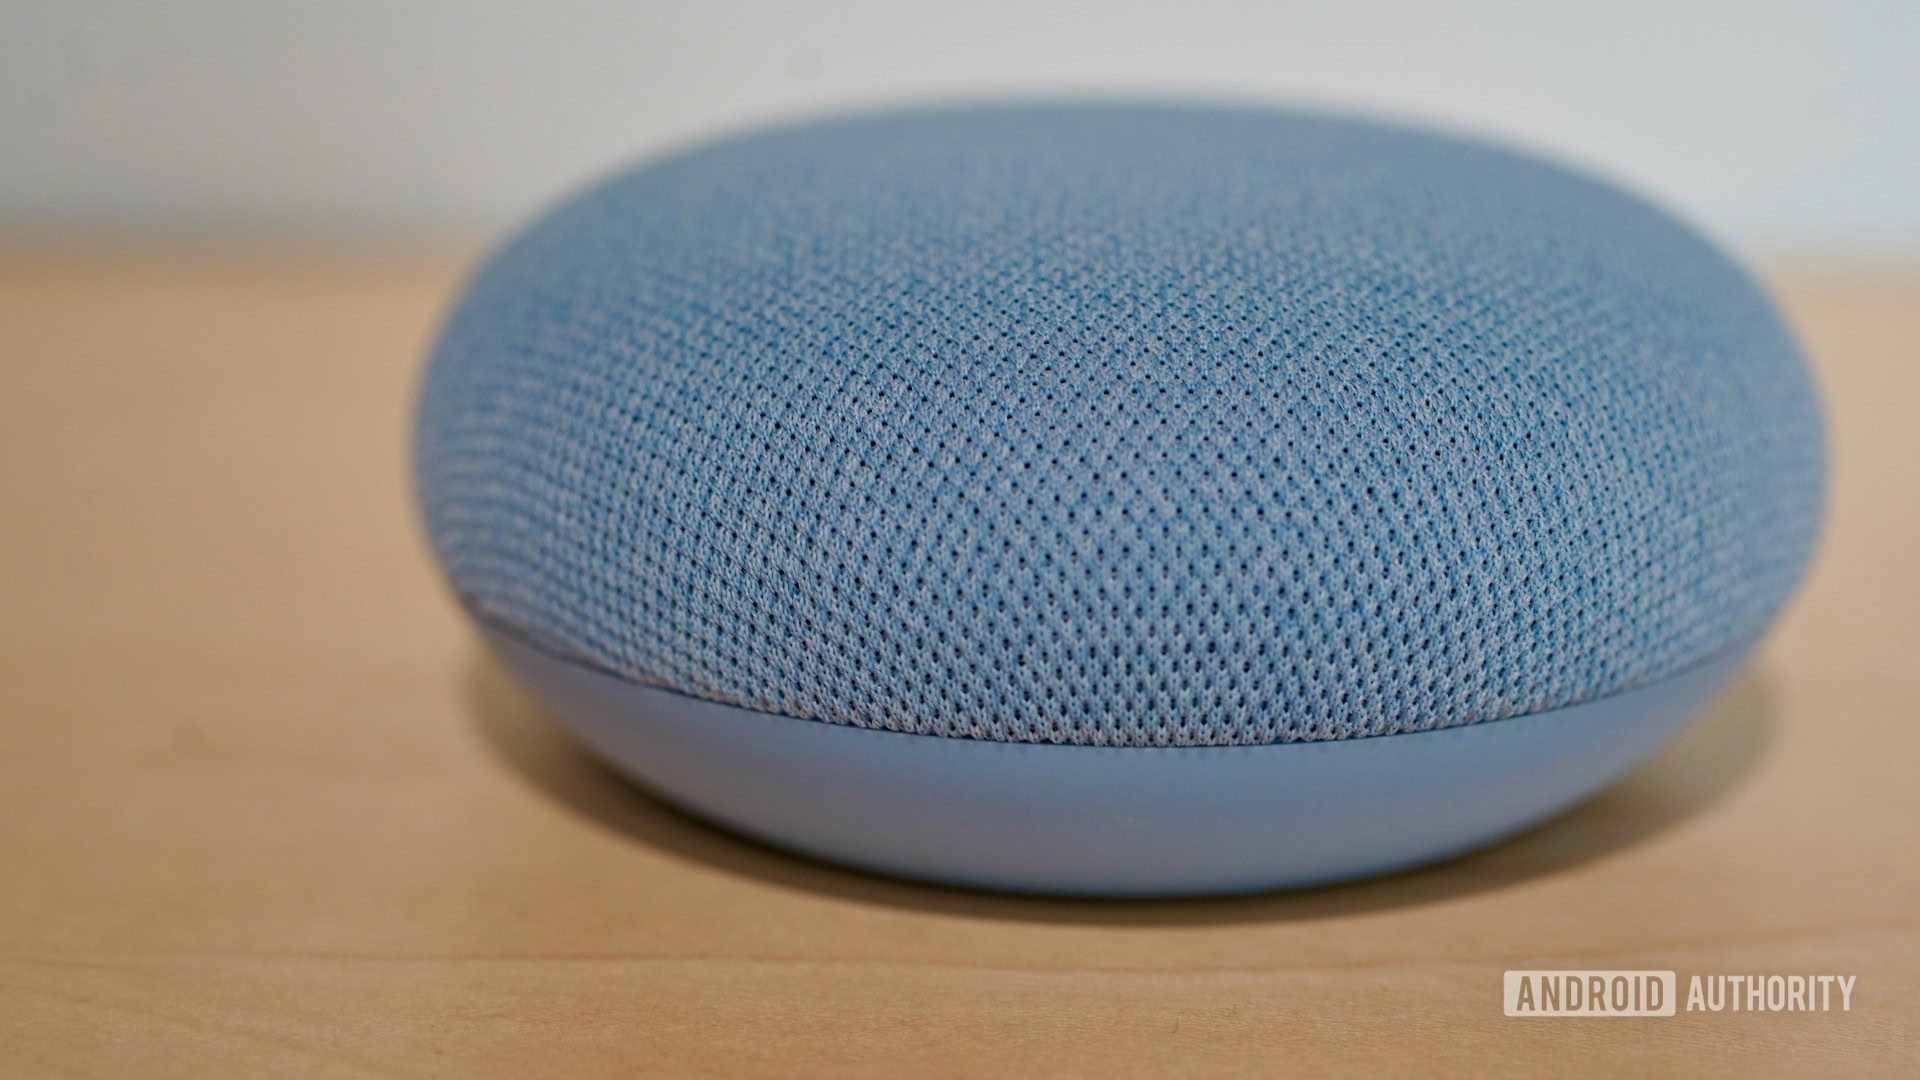 Google Nest Mini Review: Why it's worth buying - 9to5Google